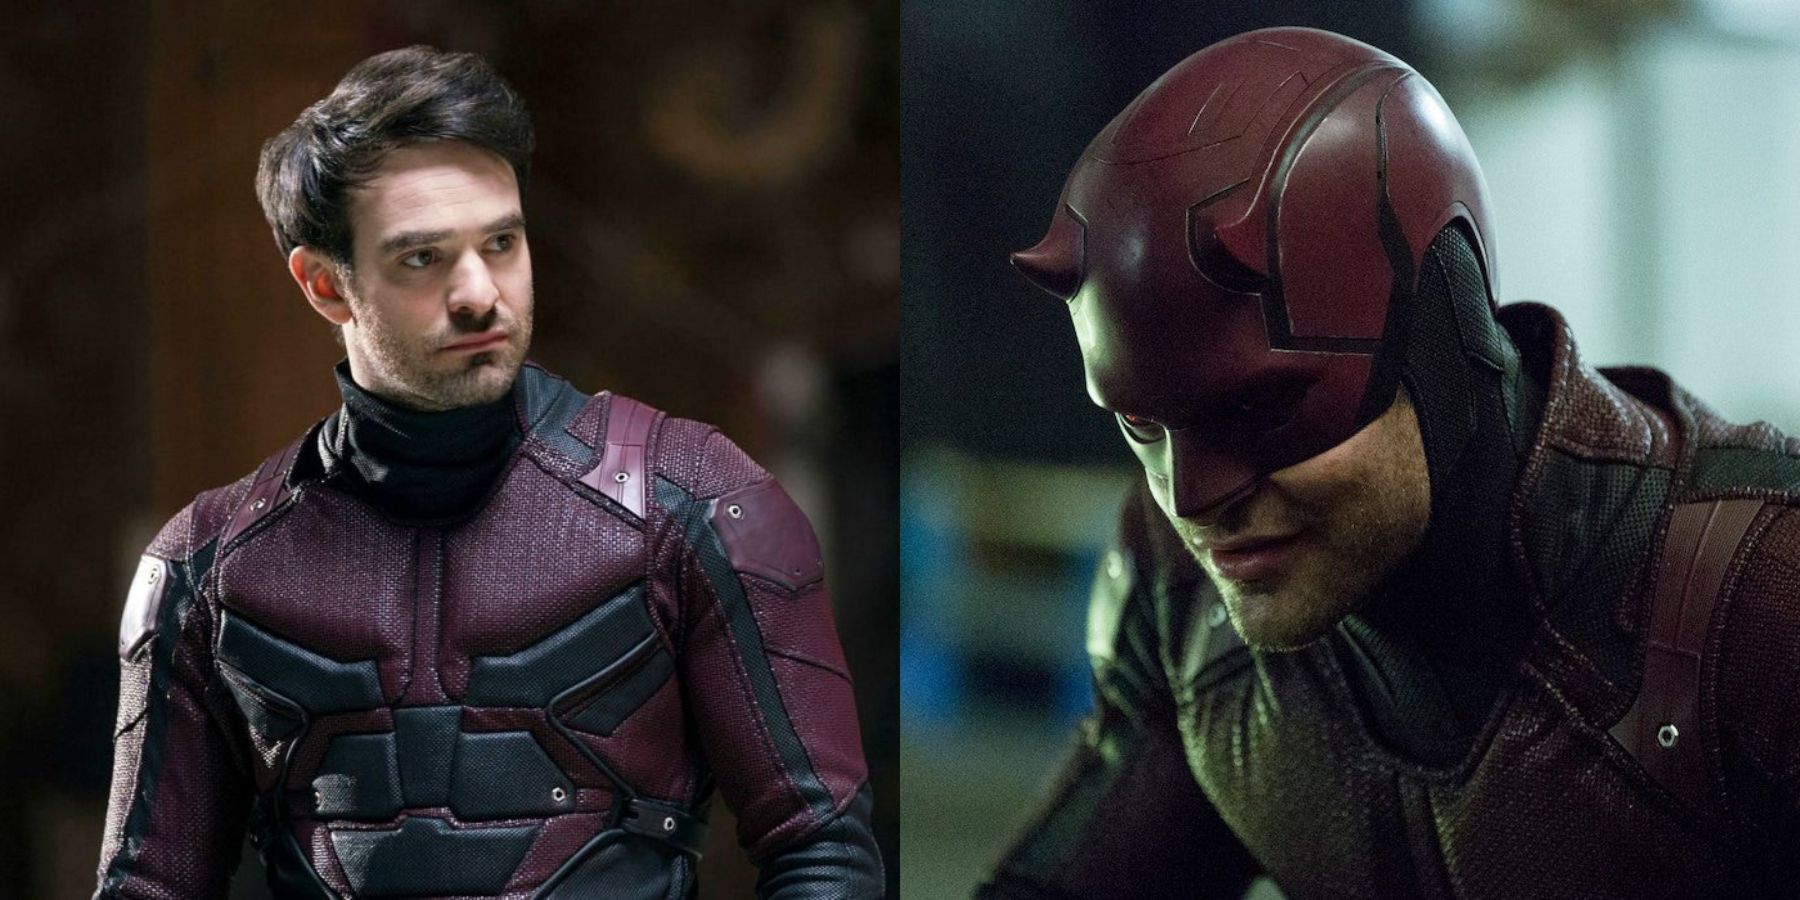 Kevin Feige has officially confirmed Charlie Cox as the MCU's Daredevil